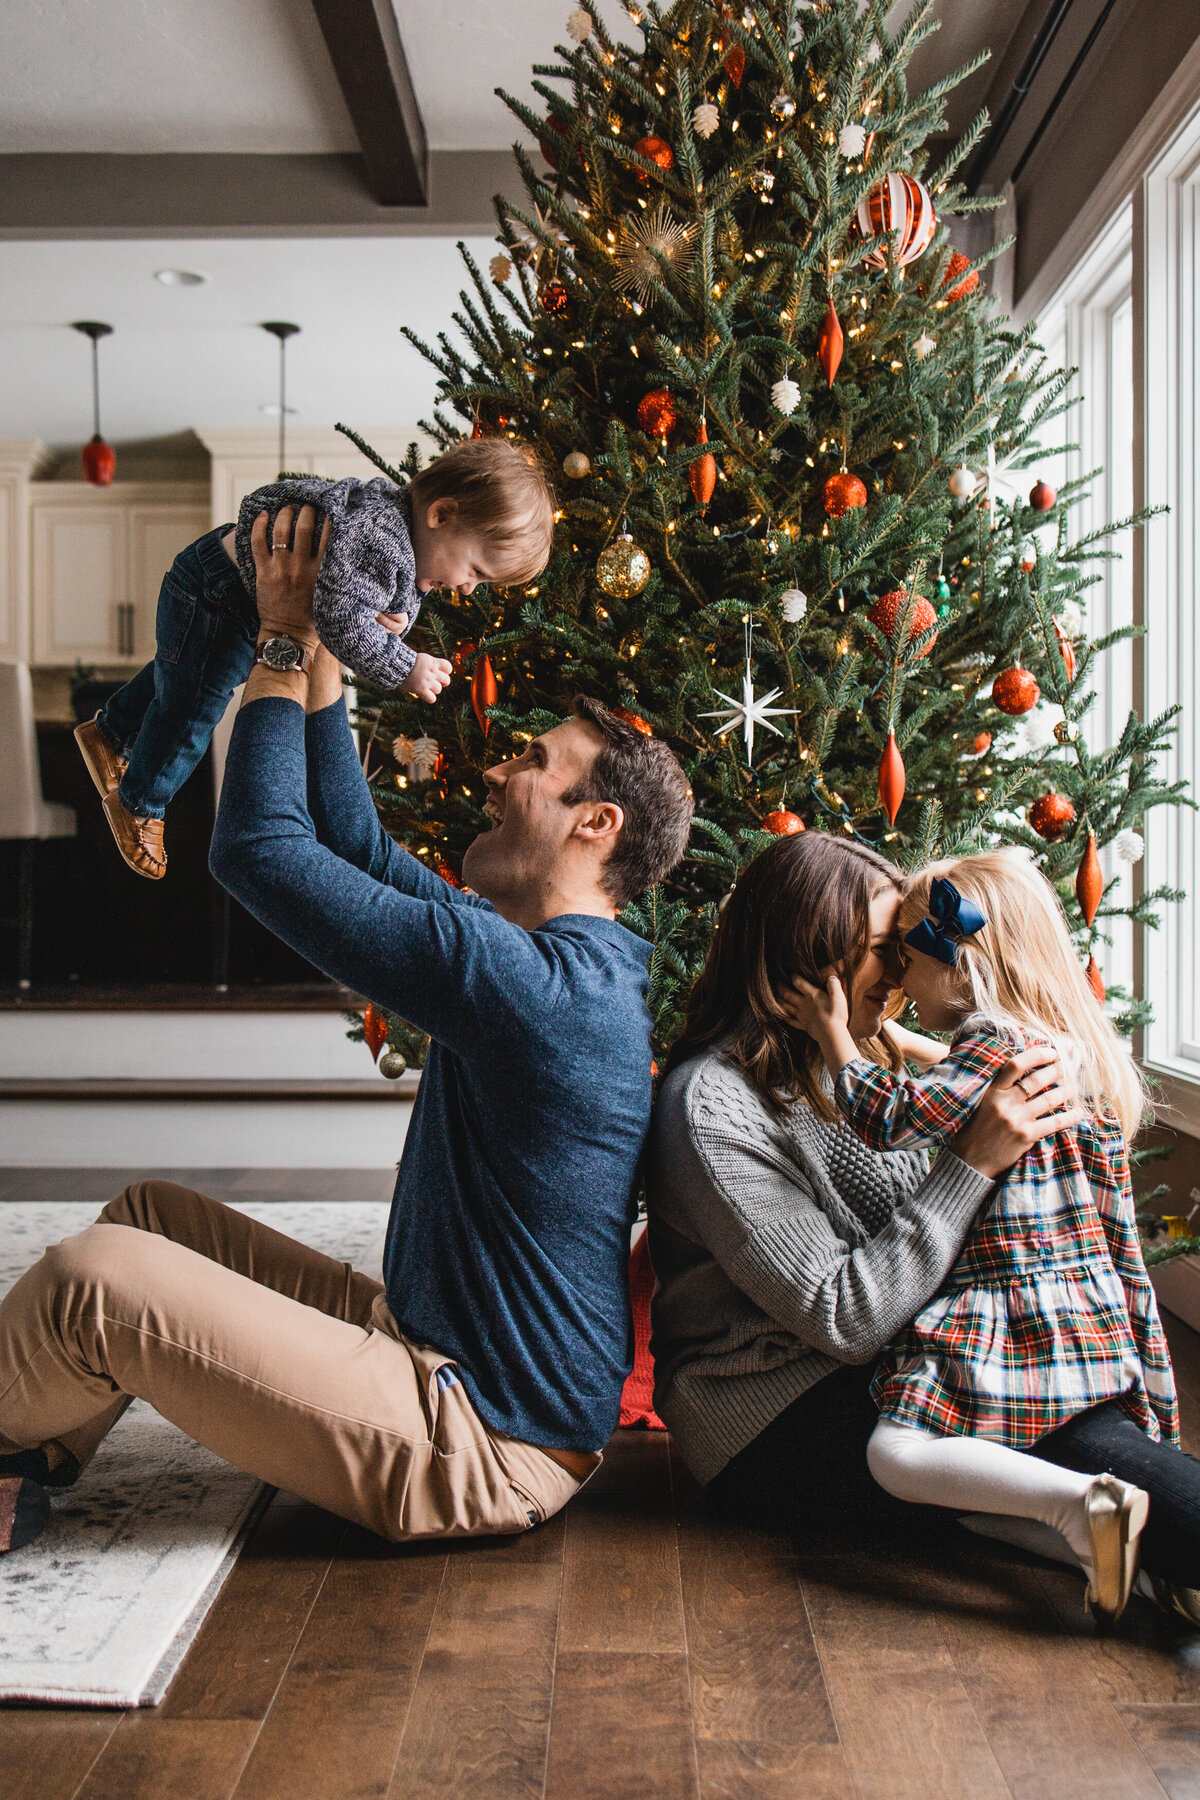 Mom and dad playing with kids in front of a Christmas tree